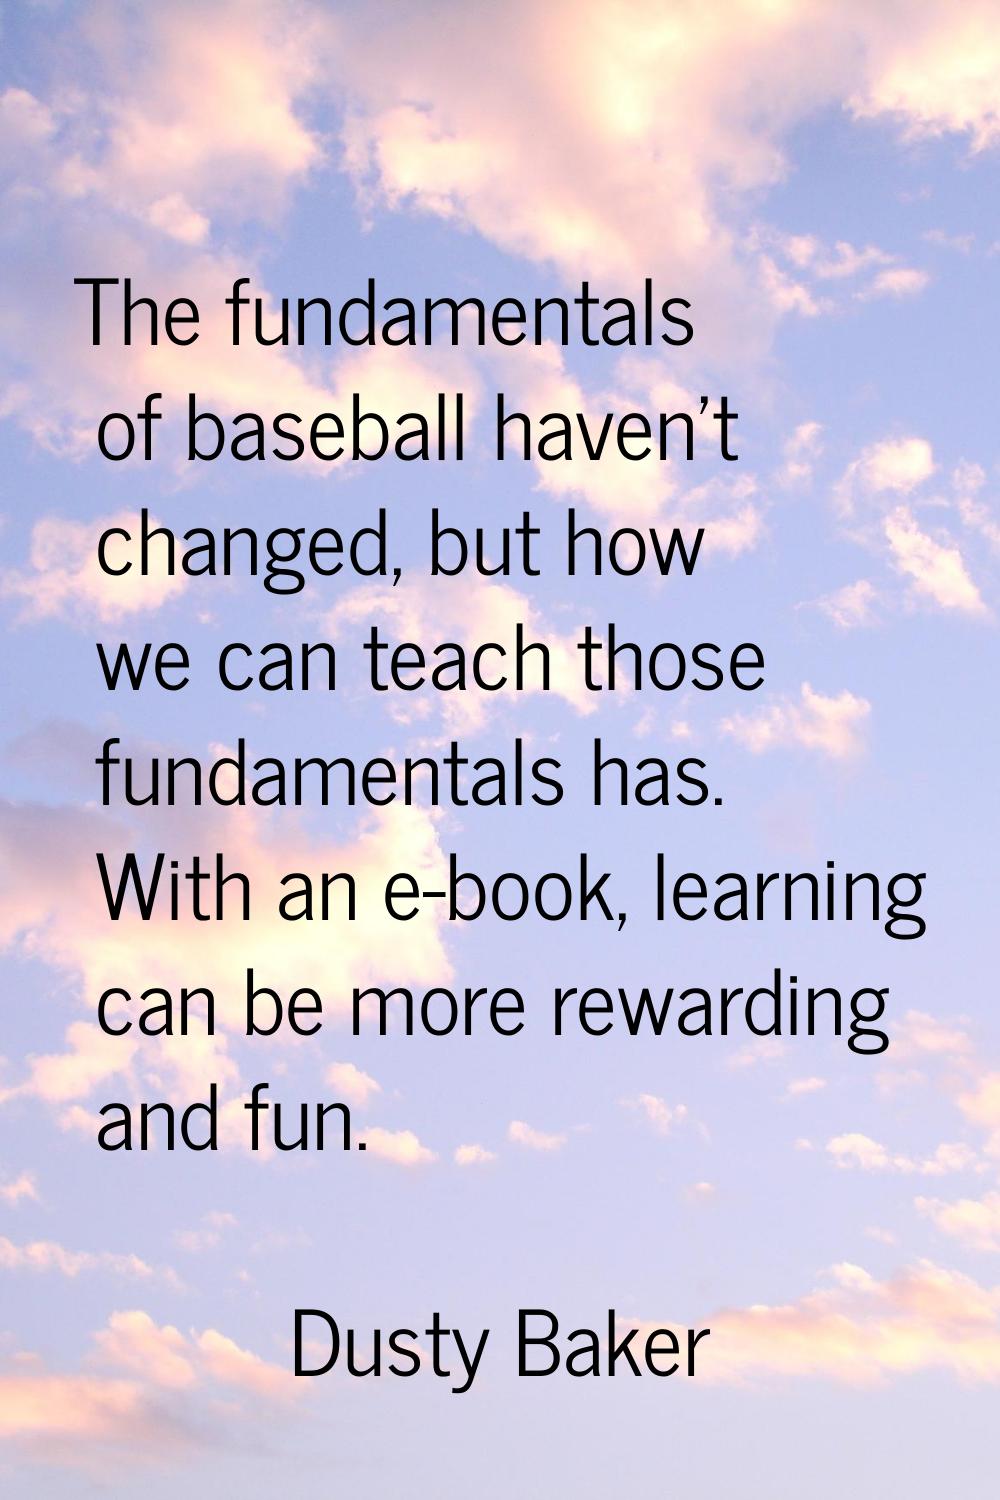 The fundamentals of baseball haven't changed, but how we can teach those fundamentals has. With an 